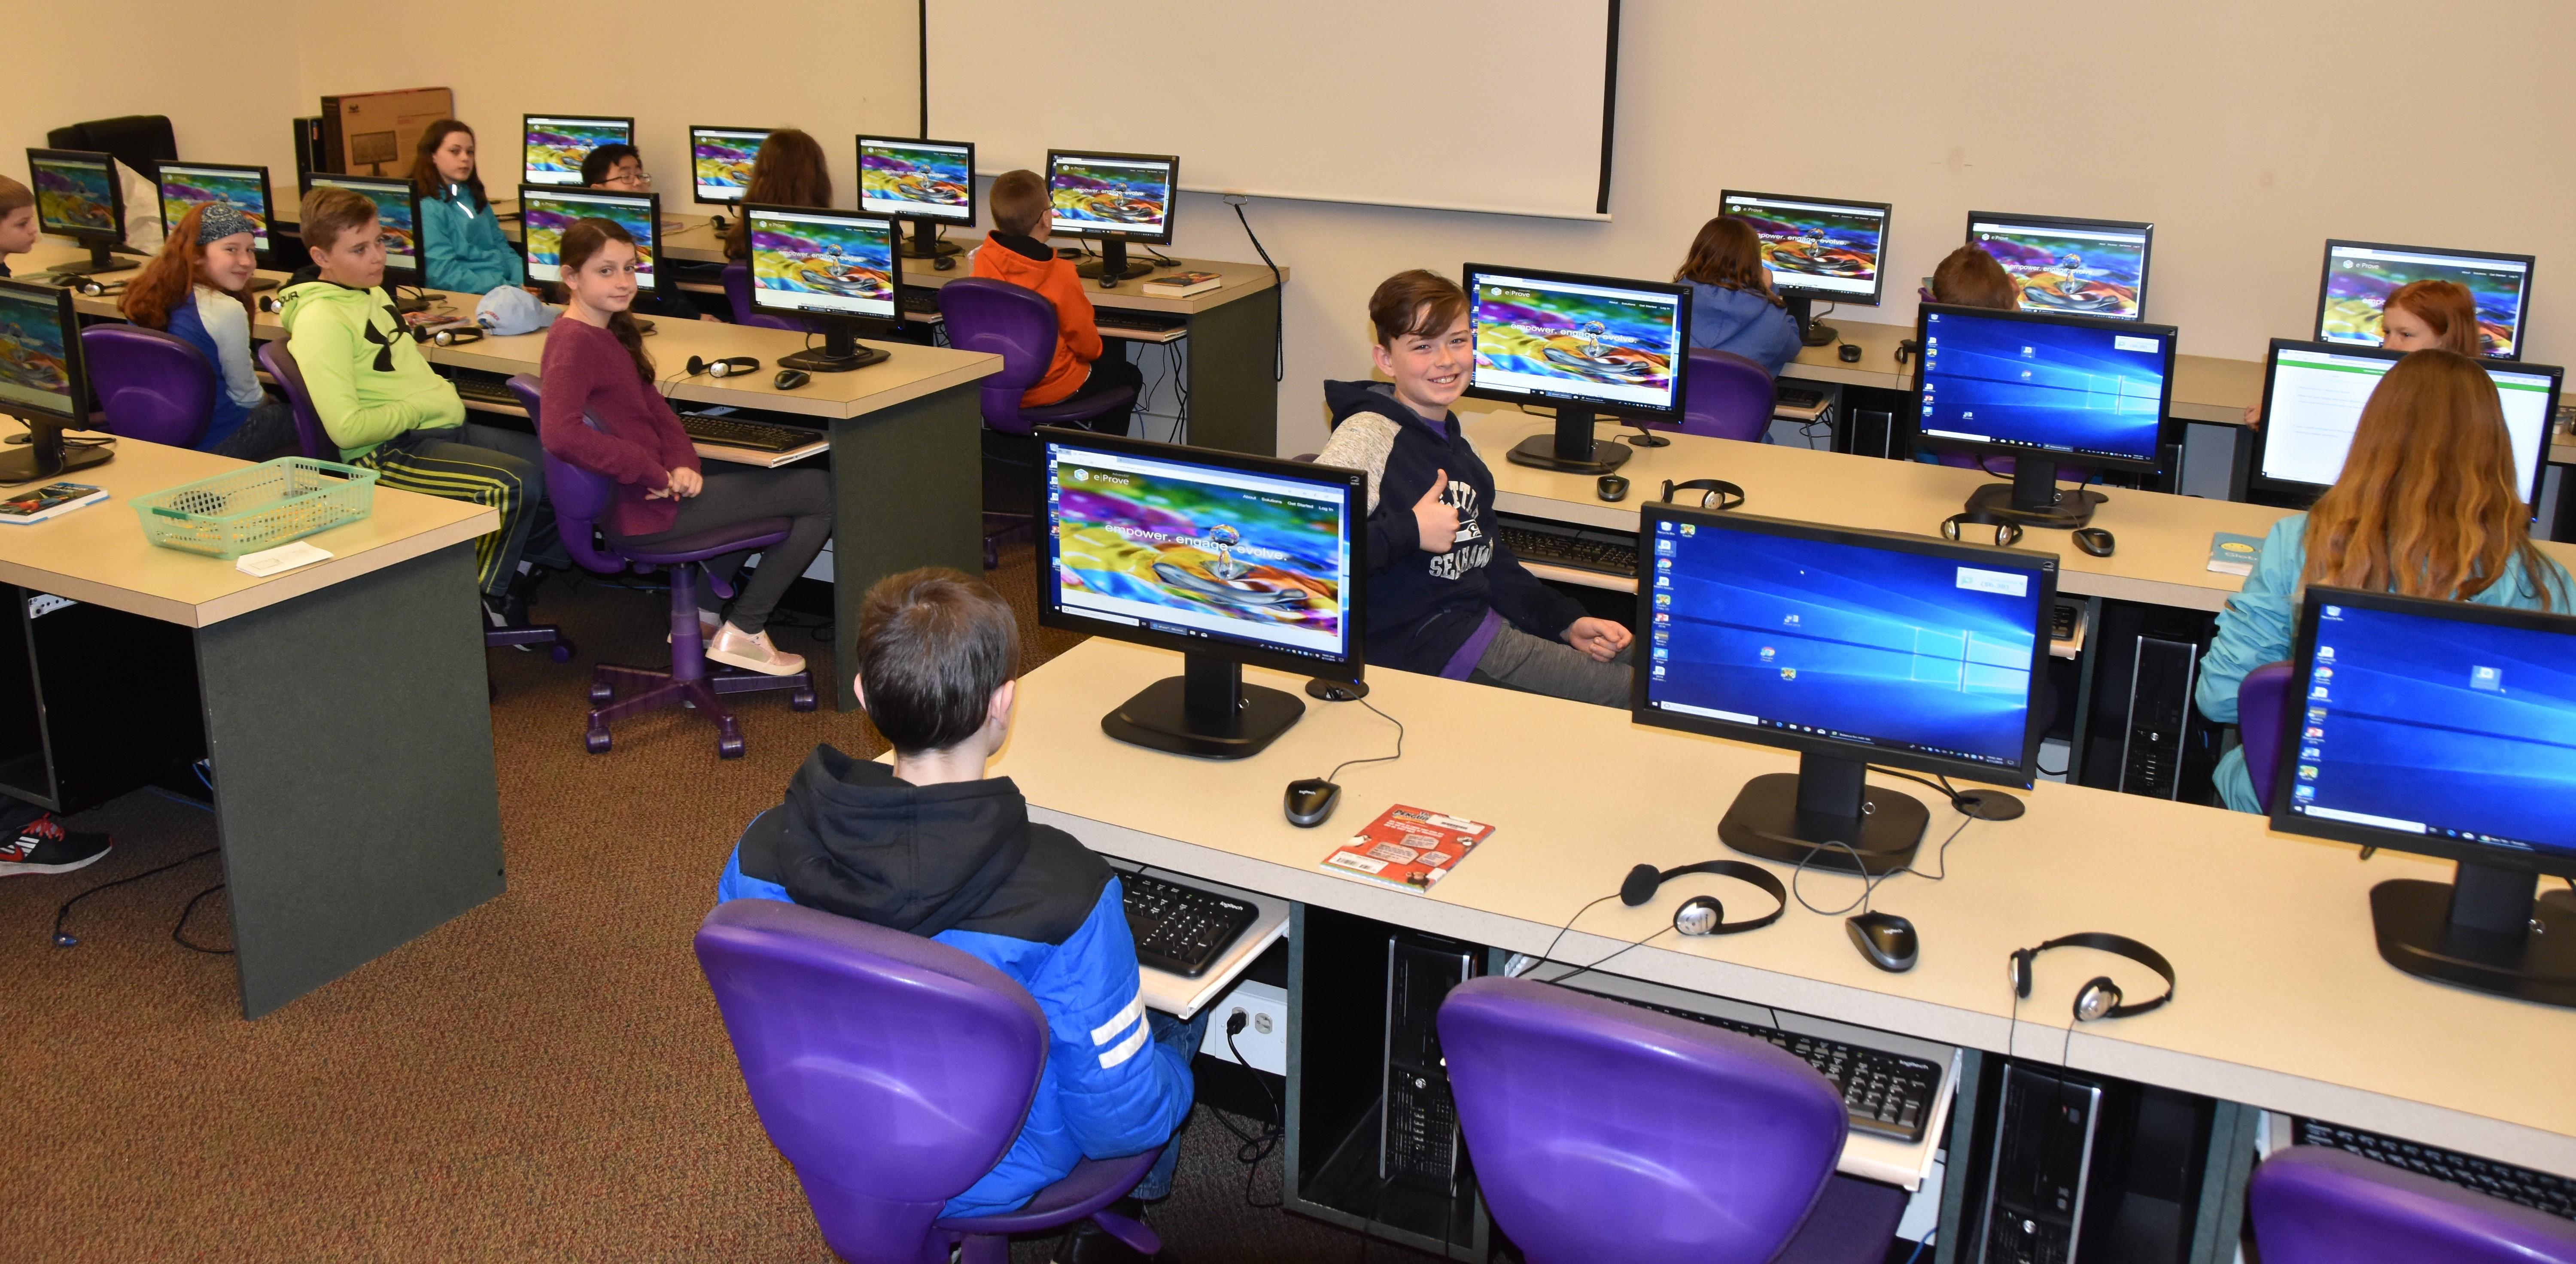 New monitors at the elementary school computer lab